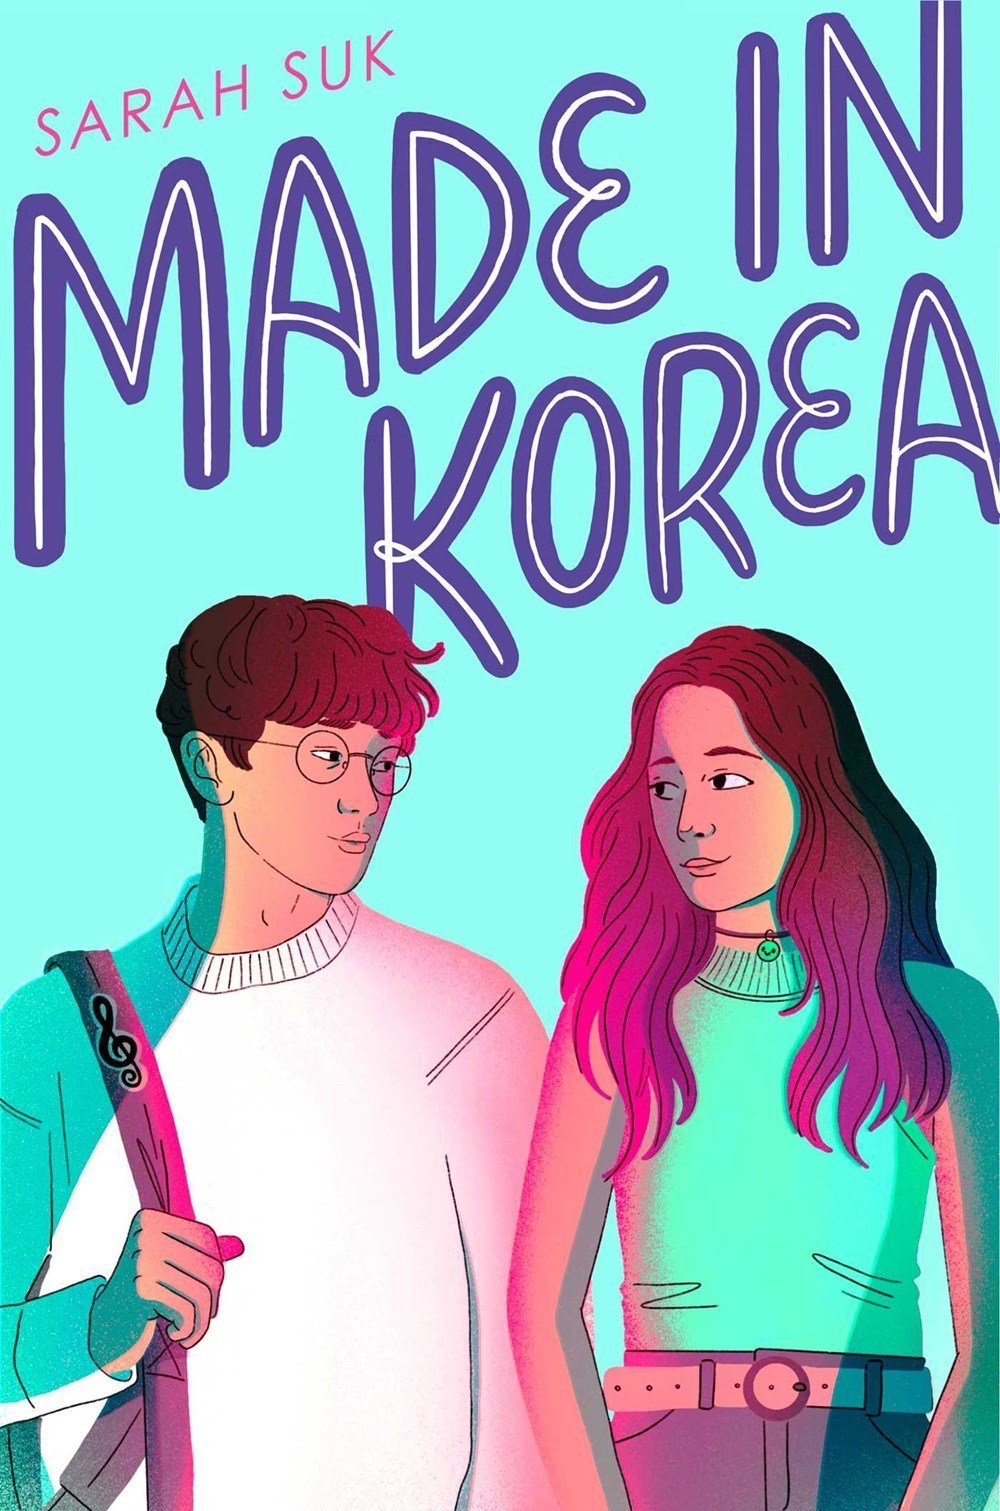 DOWNLOAD MADE IN KOREA COVER